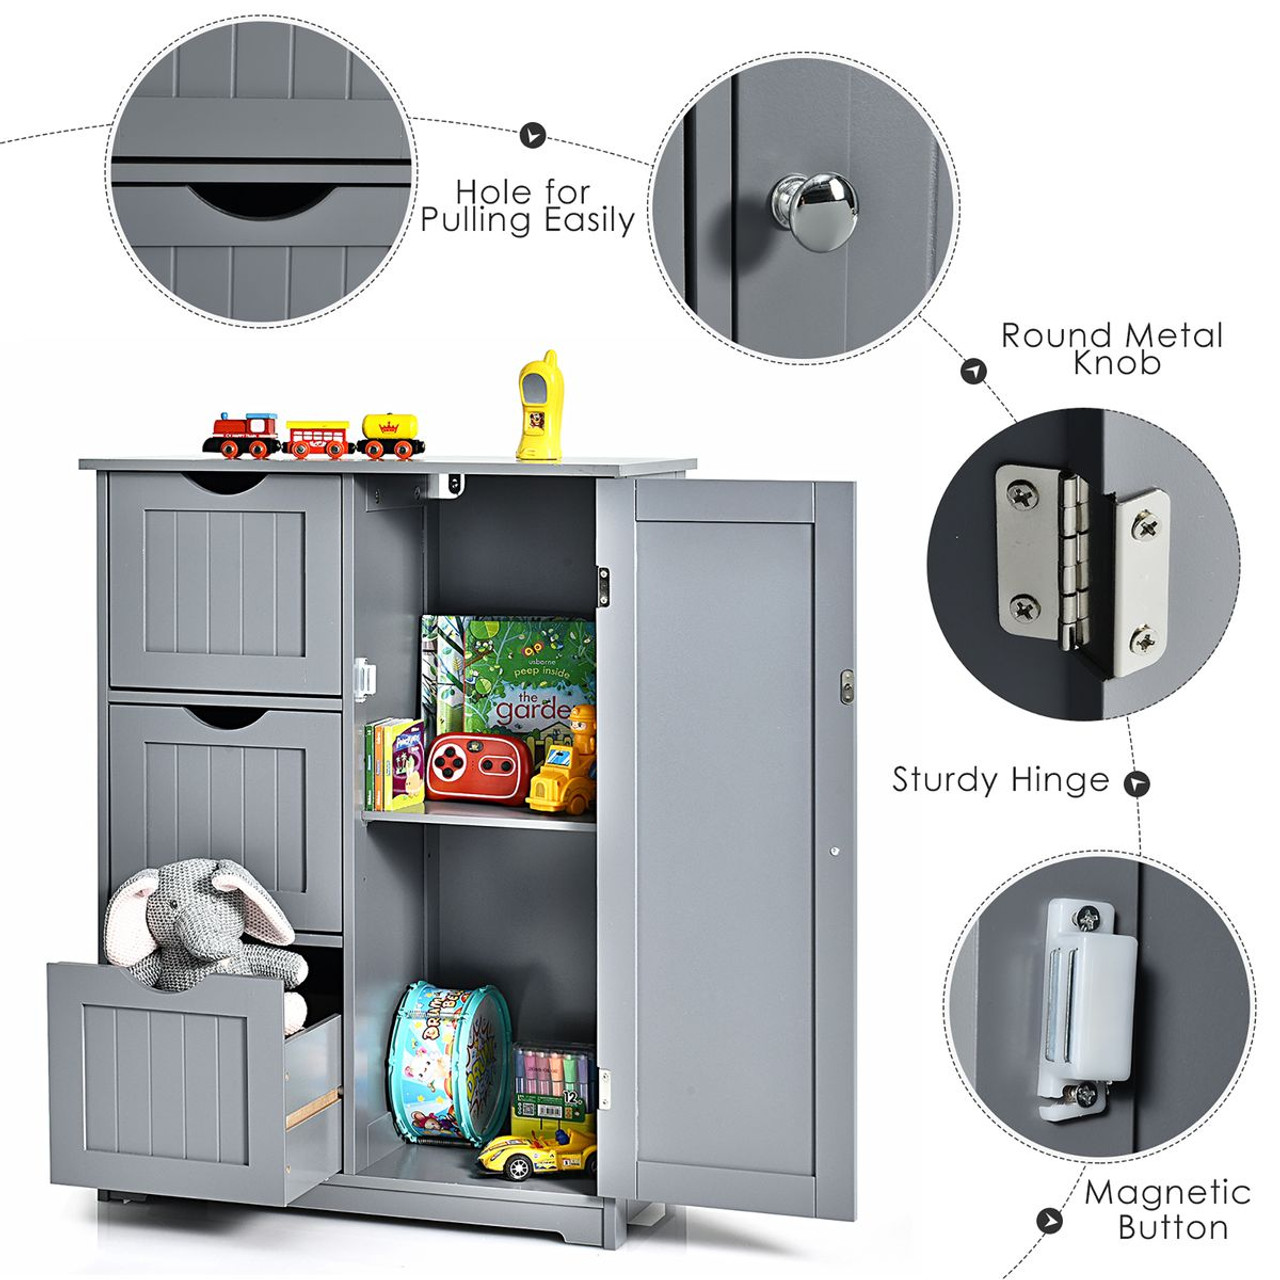 Costway Floor Cabinet with 3 Drawers product image